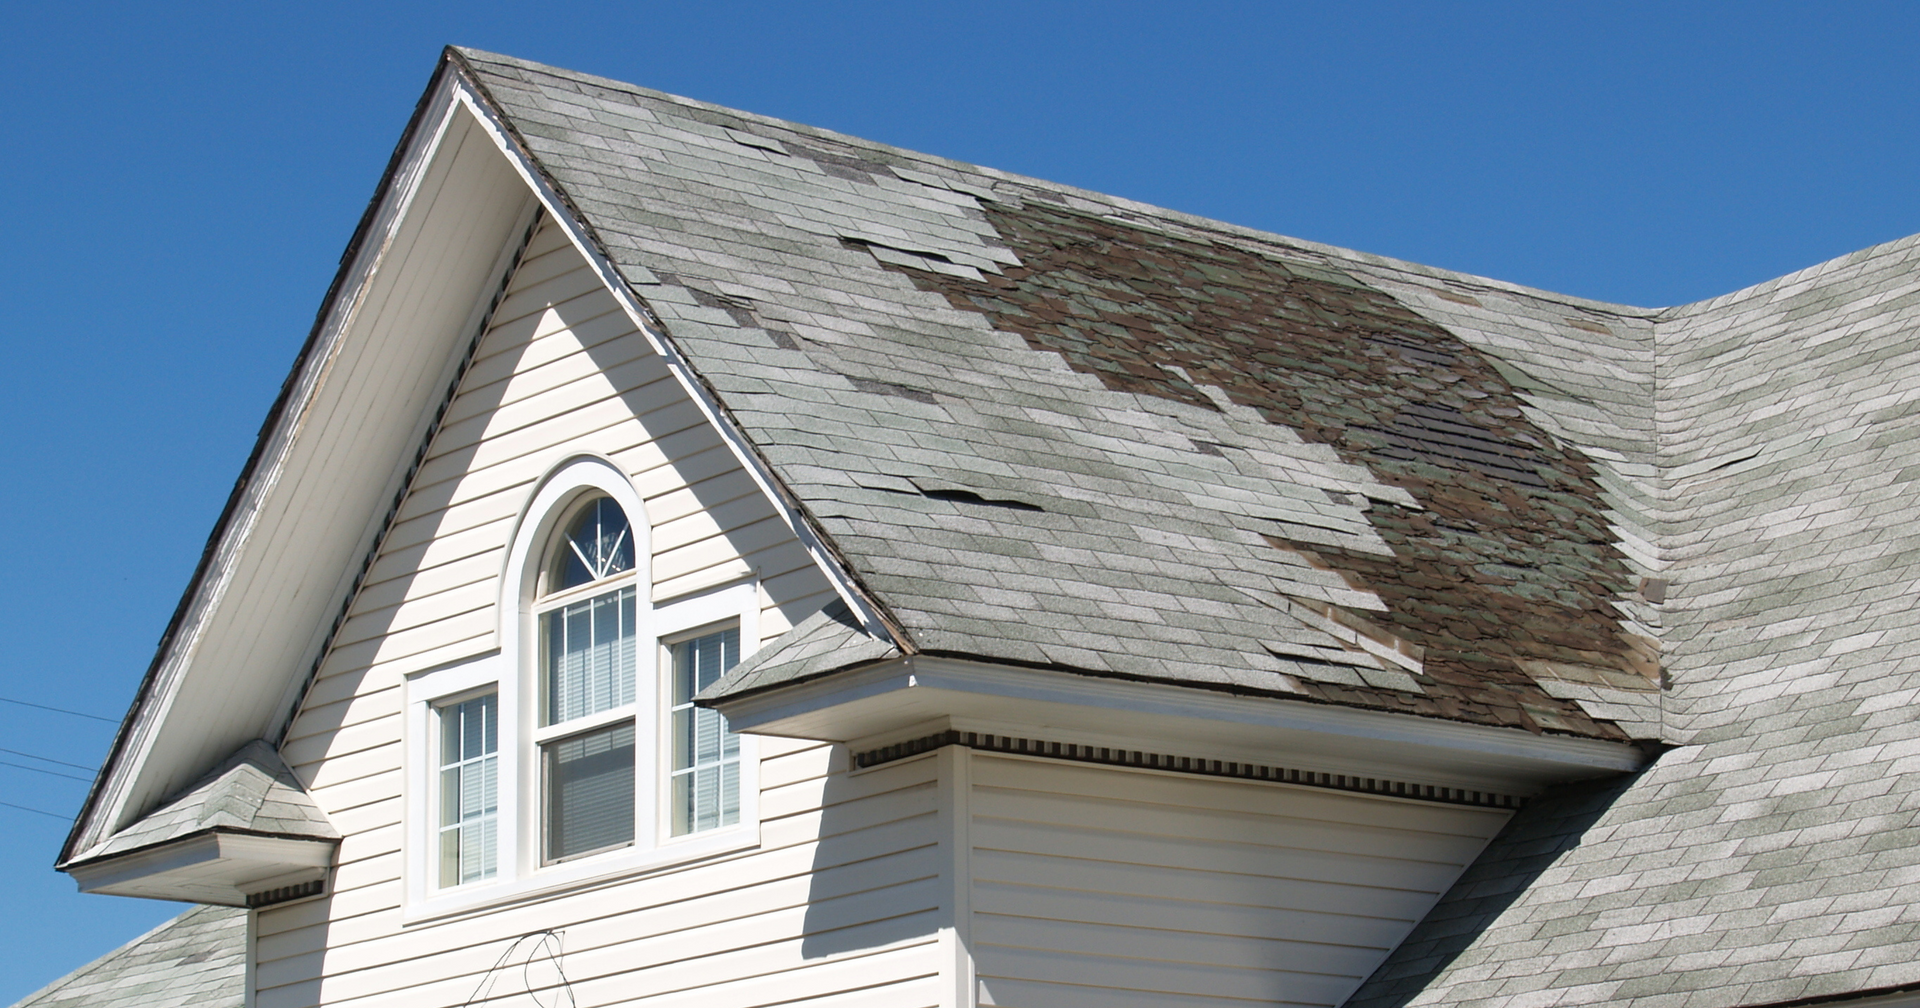 Roof Repairs with Lee’s Roofing in Wichita, KS